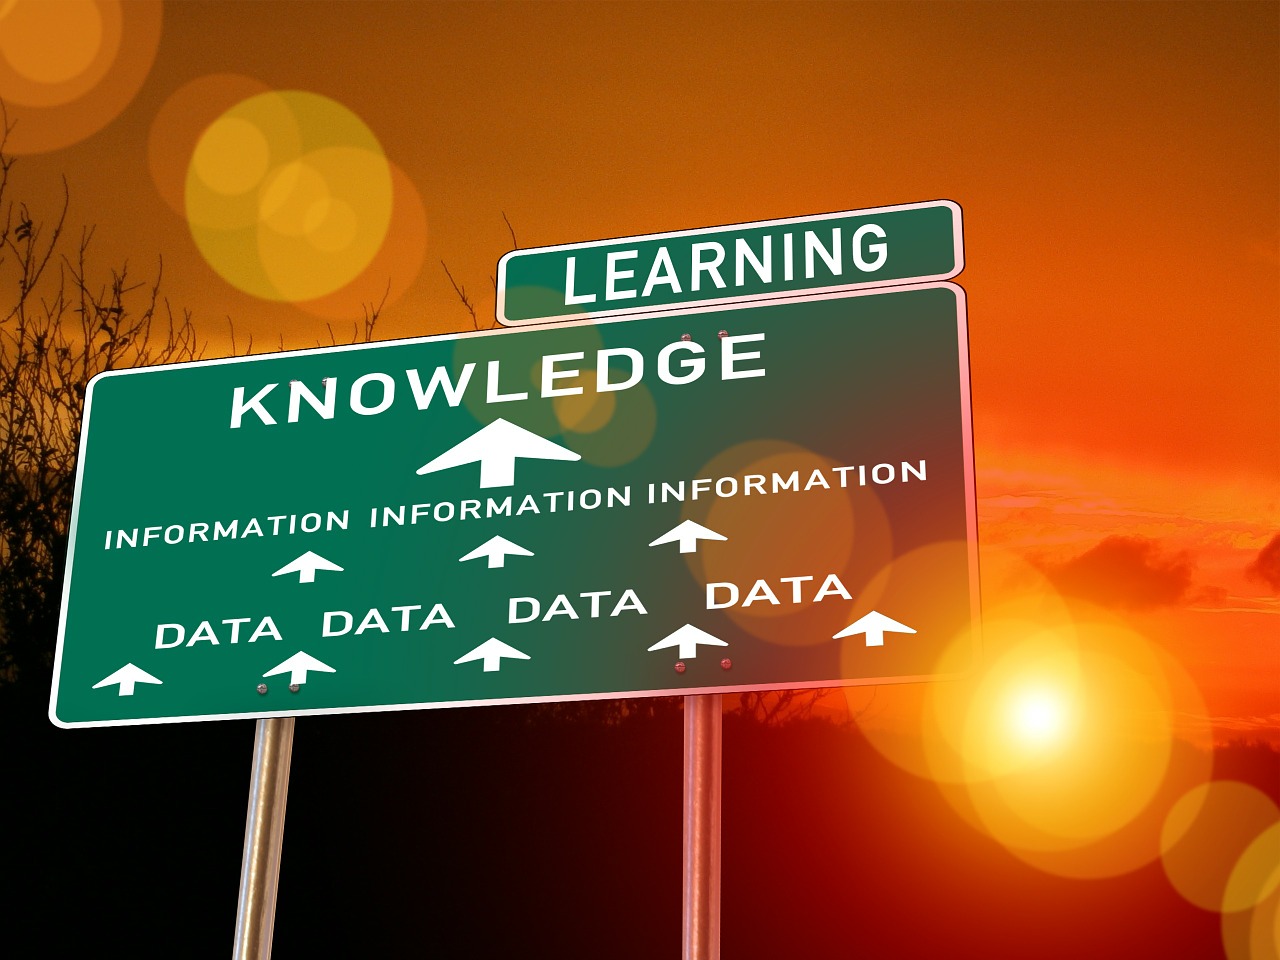 road sign with words "data" pointing to words "information" pointing to word "knowledge" with the word "learning above